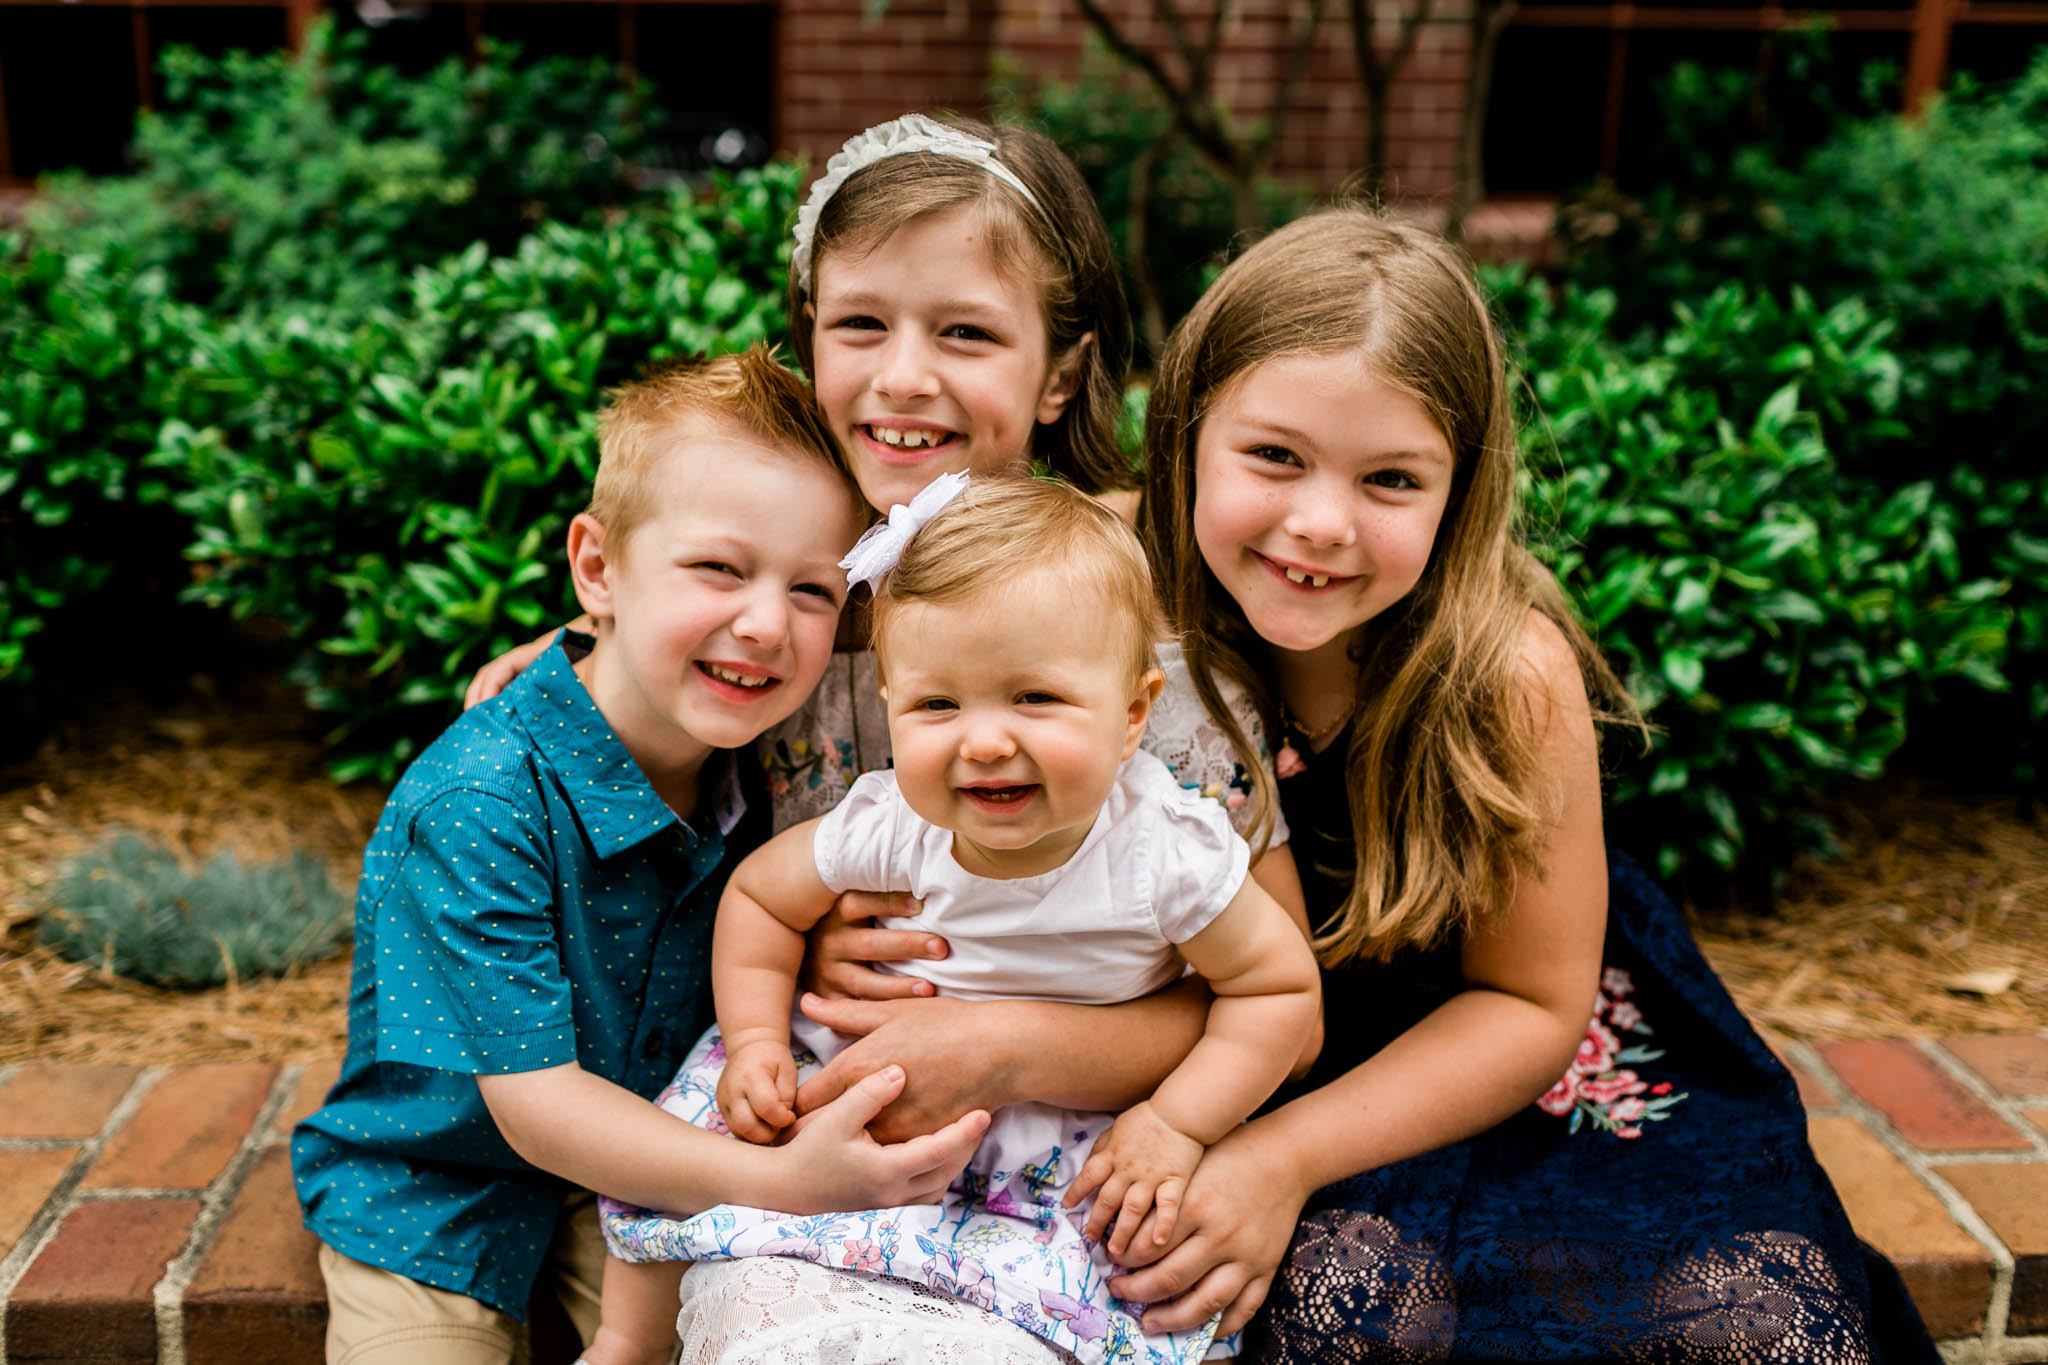 Durham Family Photographer | By G. Lin Photography | Beautiful sibling portrait outdoors at American Tobacco Campus